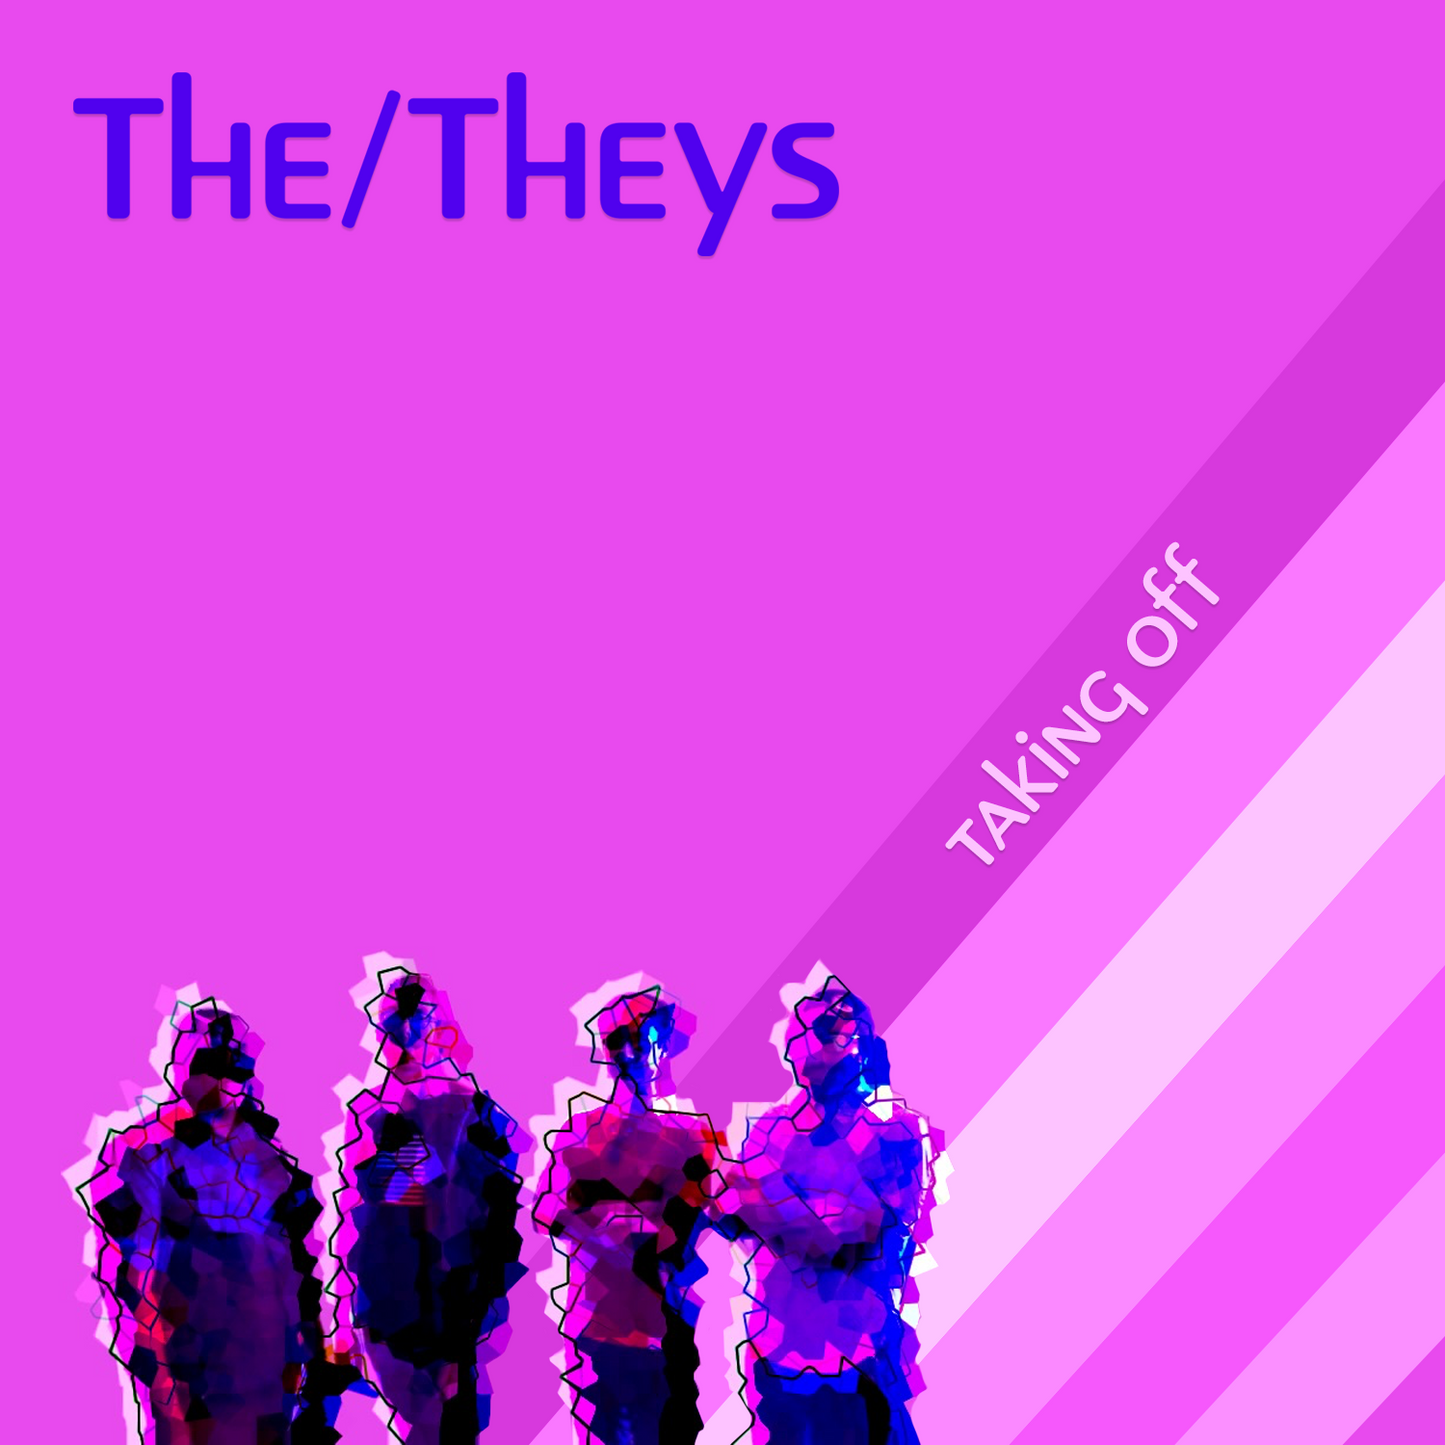 The/Theys "Taking Off" single